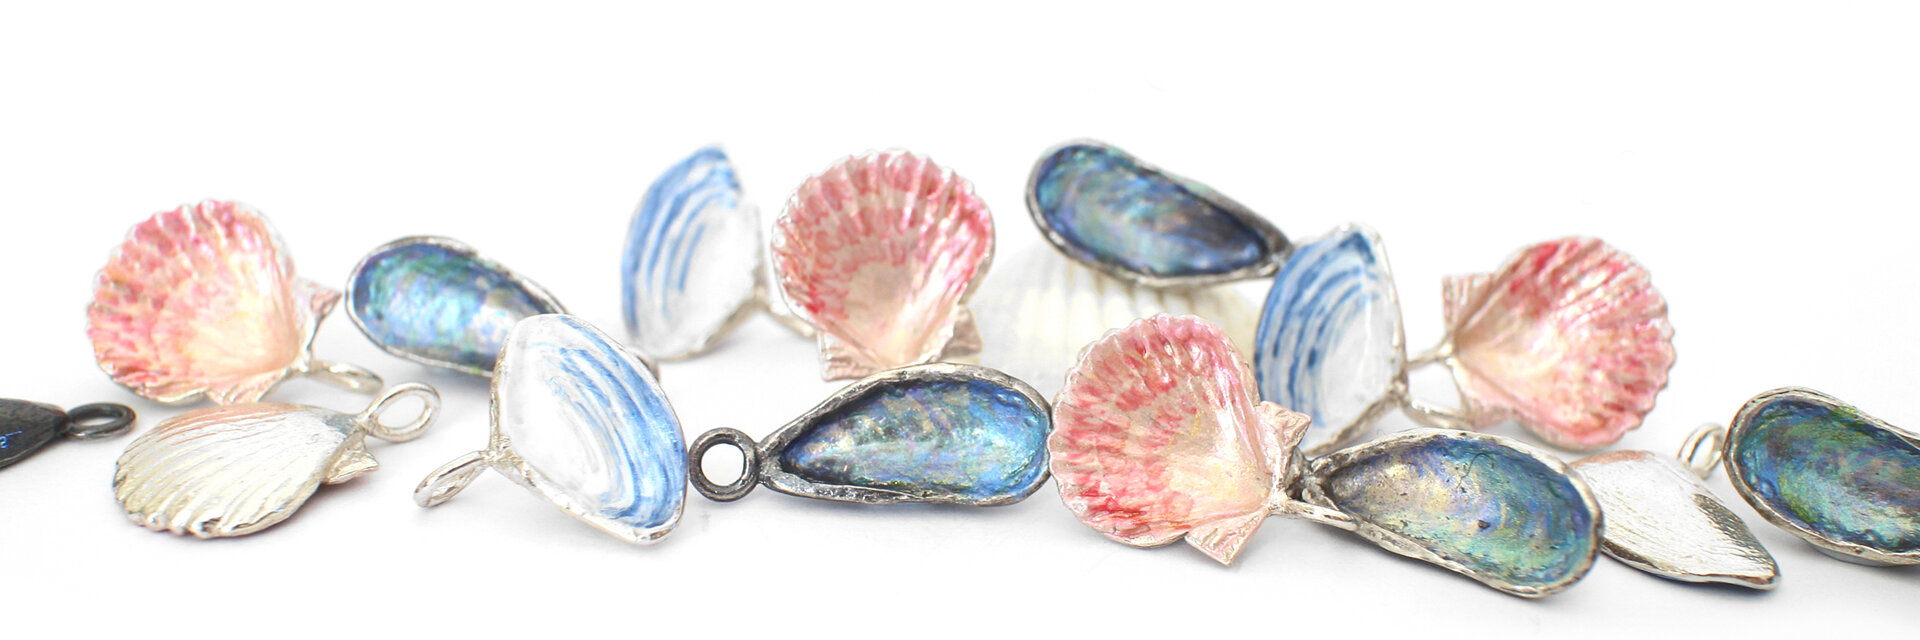 shells collection fanshells mussels pipi paua abalone earrings necklaces nz